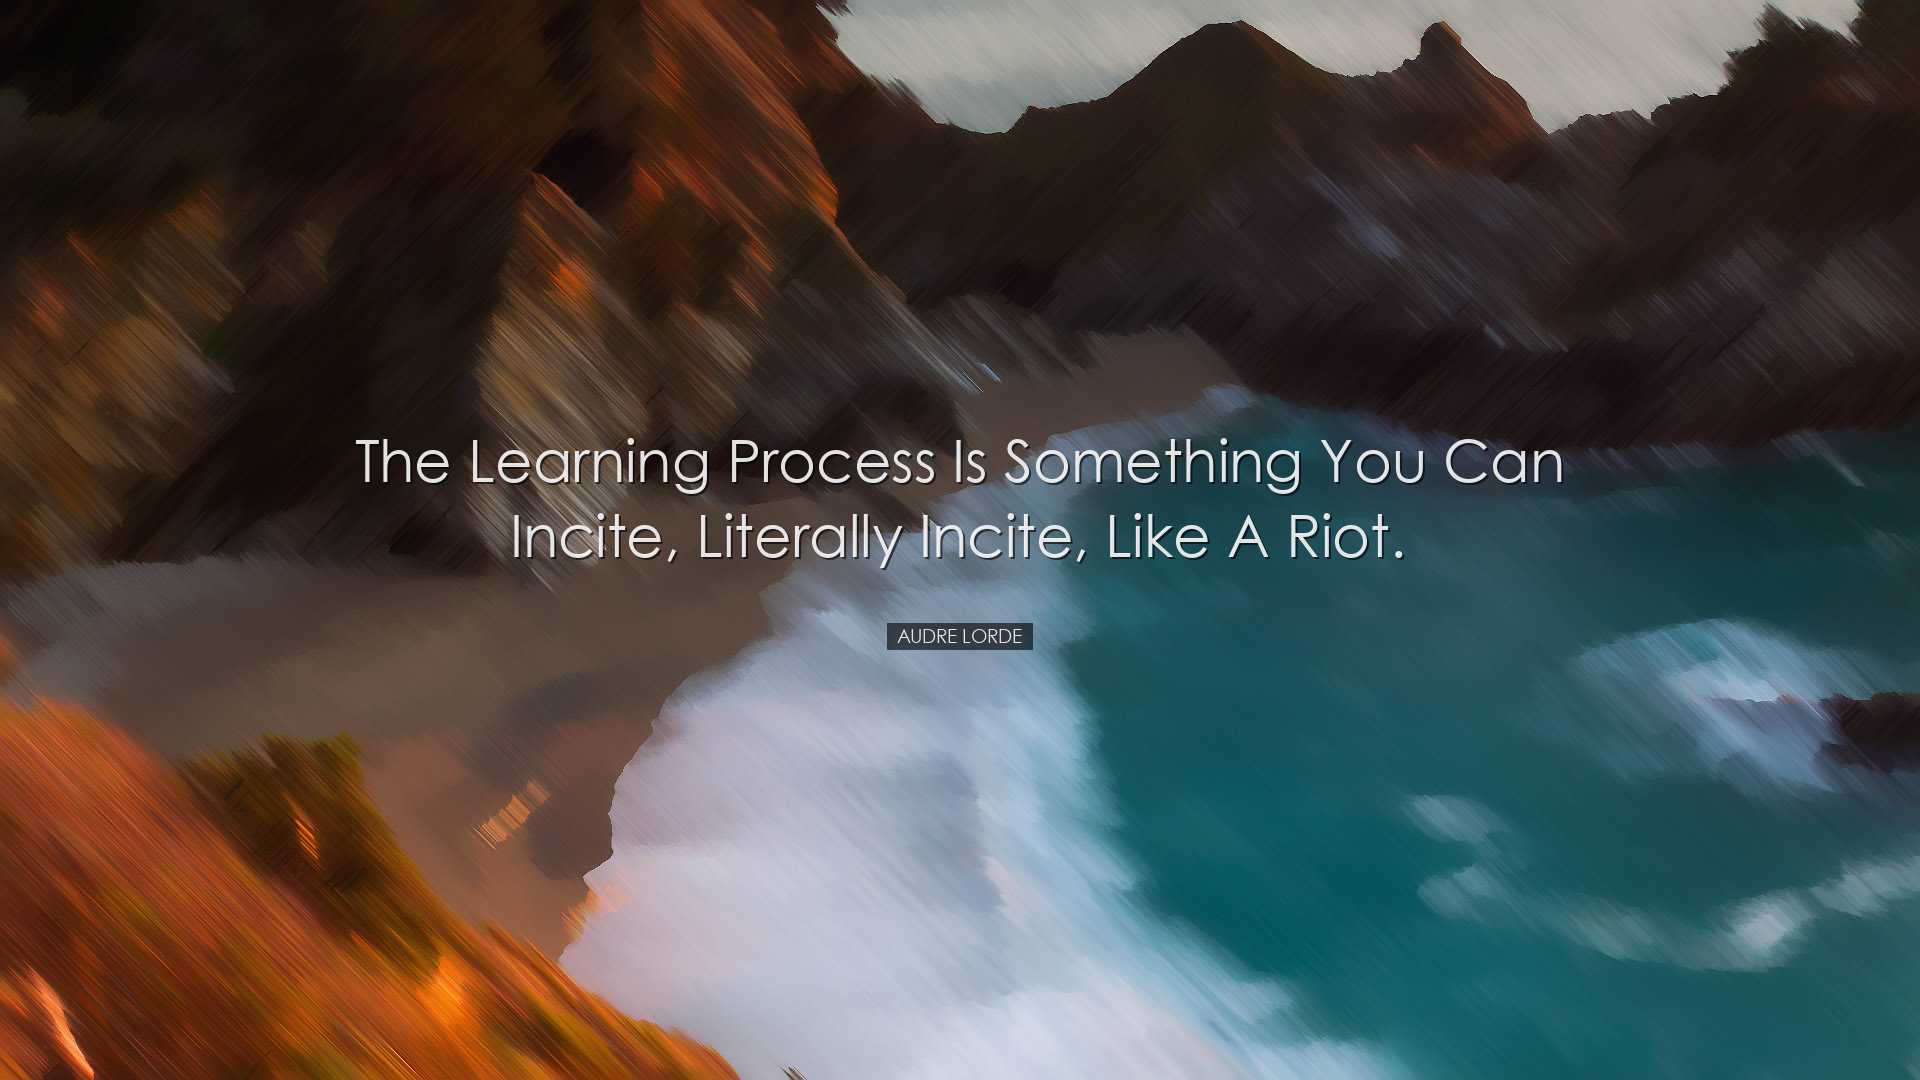 The learning process is something you can incite, literally incite